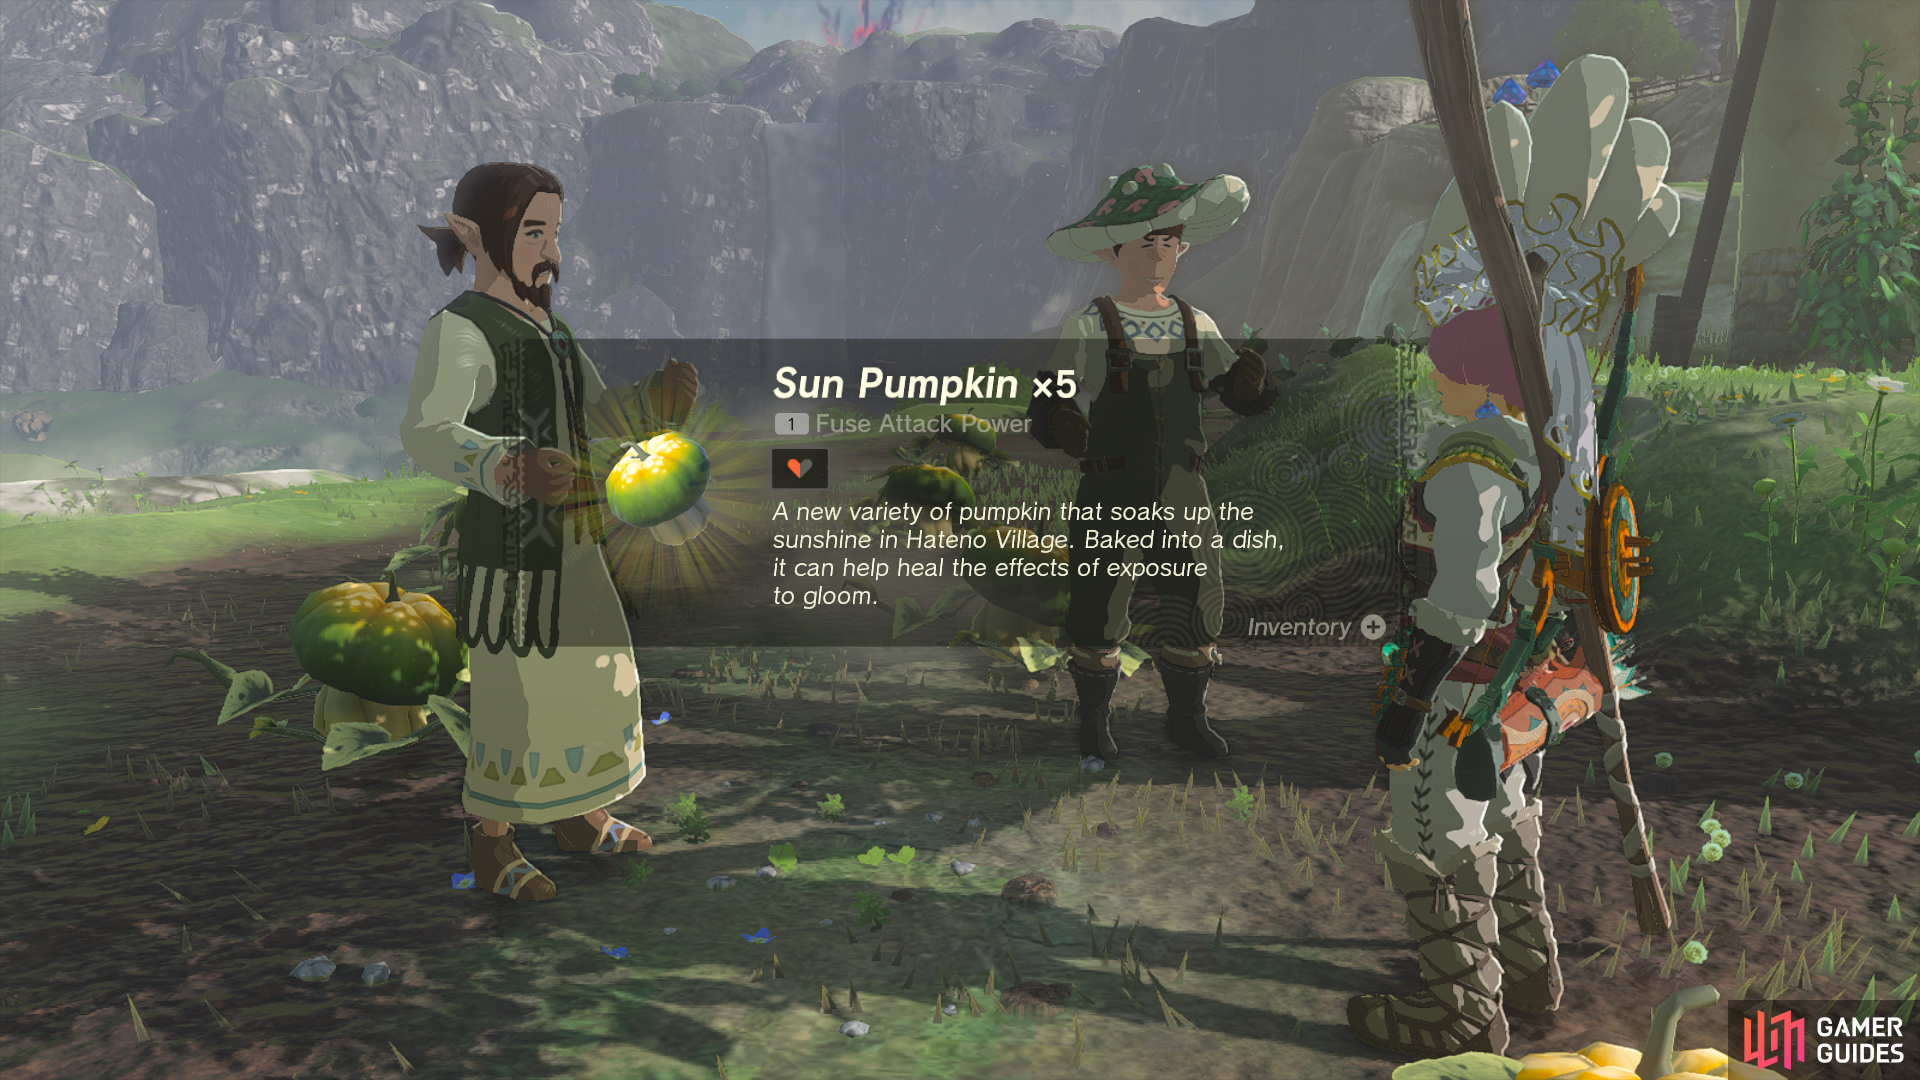 Sun Pumpkins will become available for purchase after this quest.